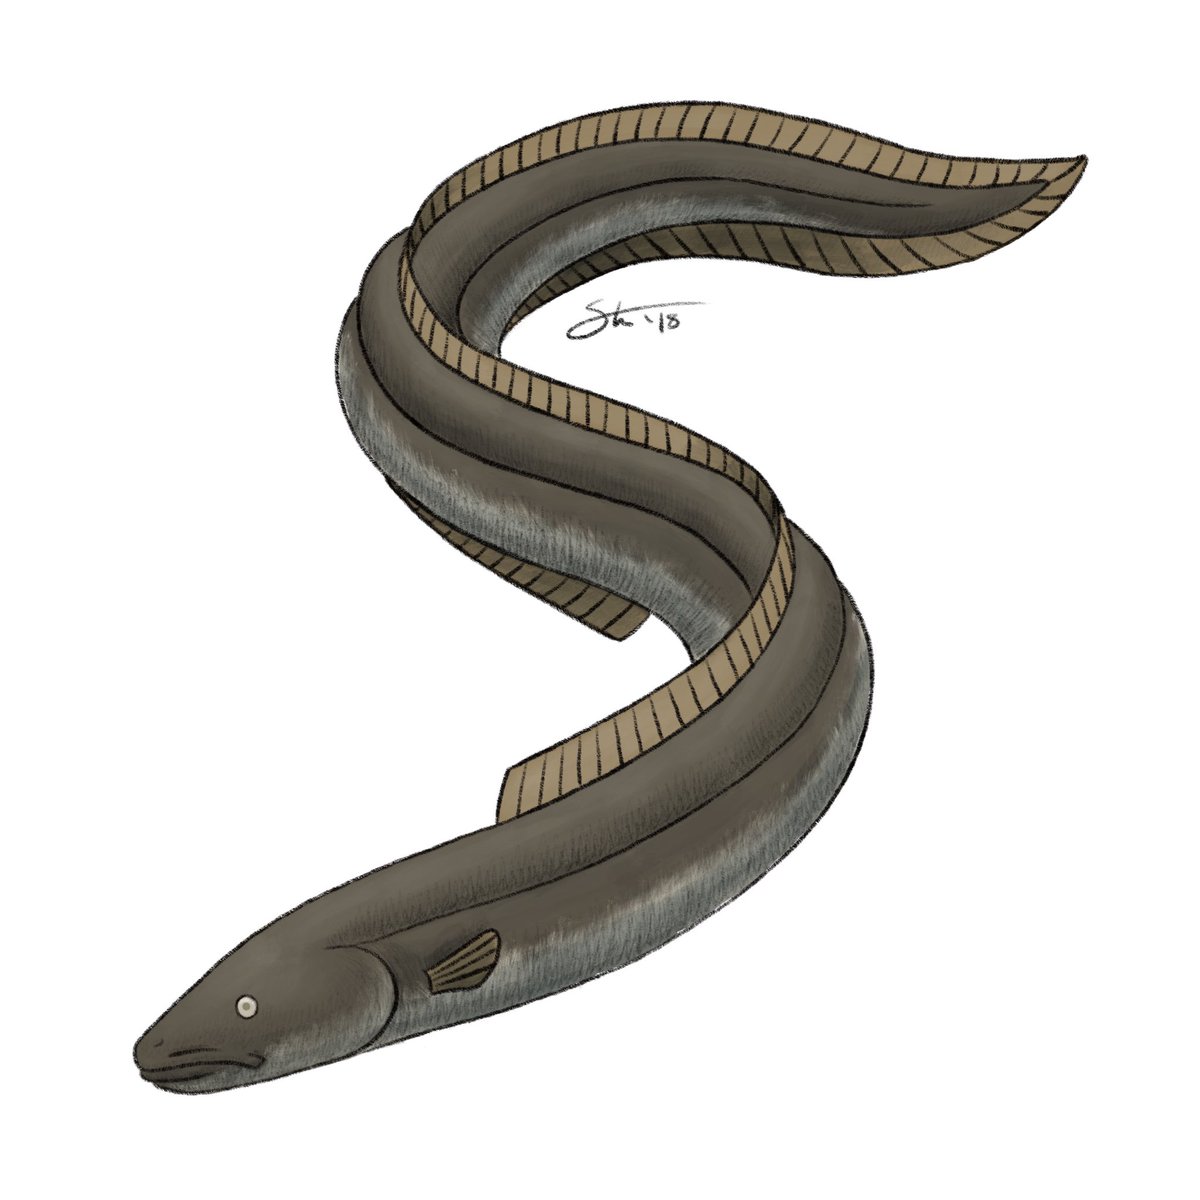 More plausible is the Super-Eel, a category containing at least 2 species of giant eel. Unfortunately, the main piece of evidence for this (a giant larva) didn’t pan out, but at least “big fish” is an easier concept to swallow than “whale trying to be a centipede”.